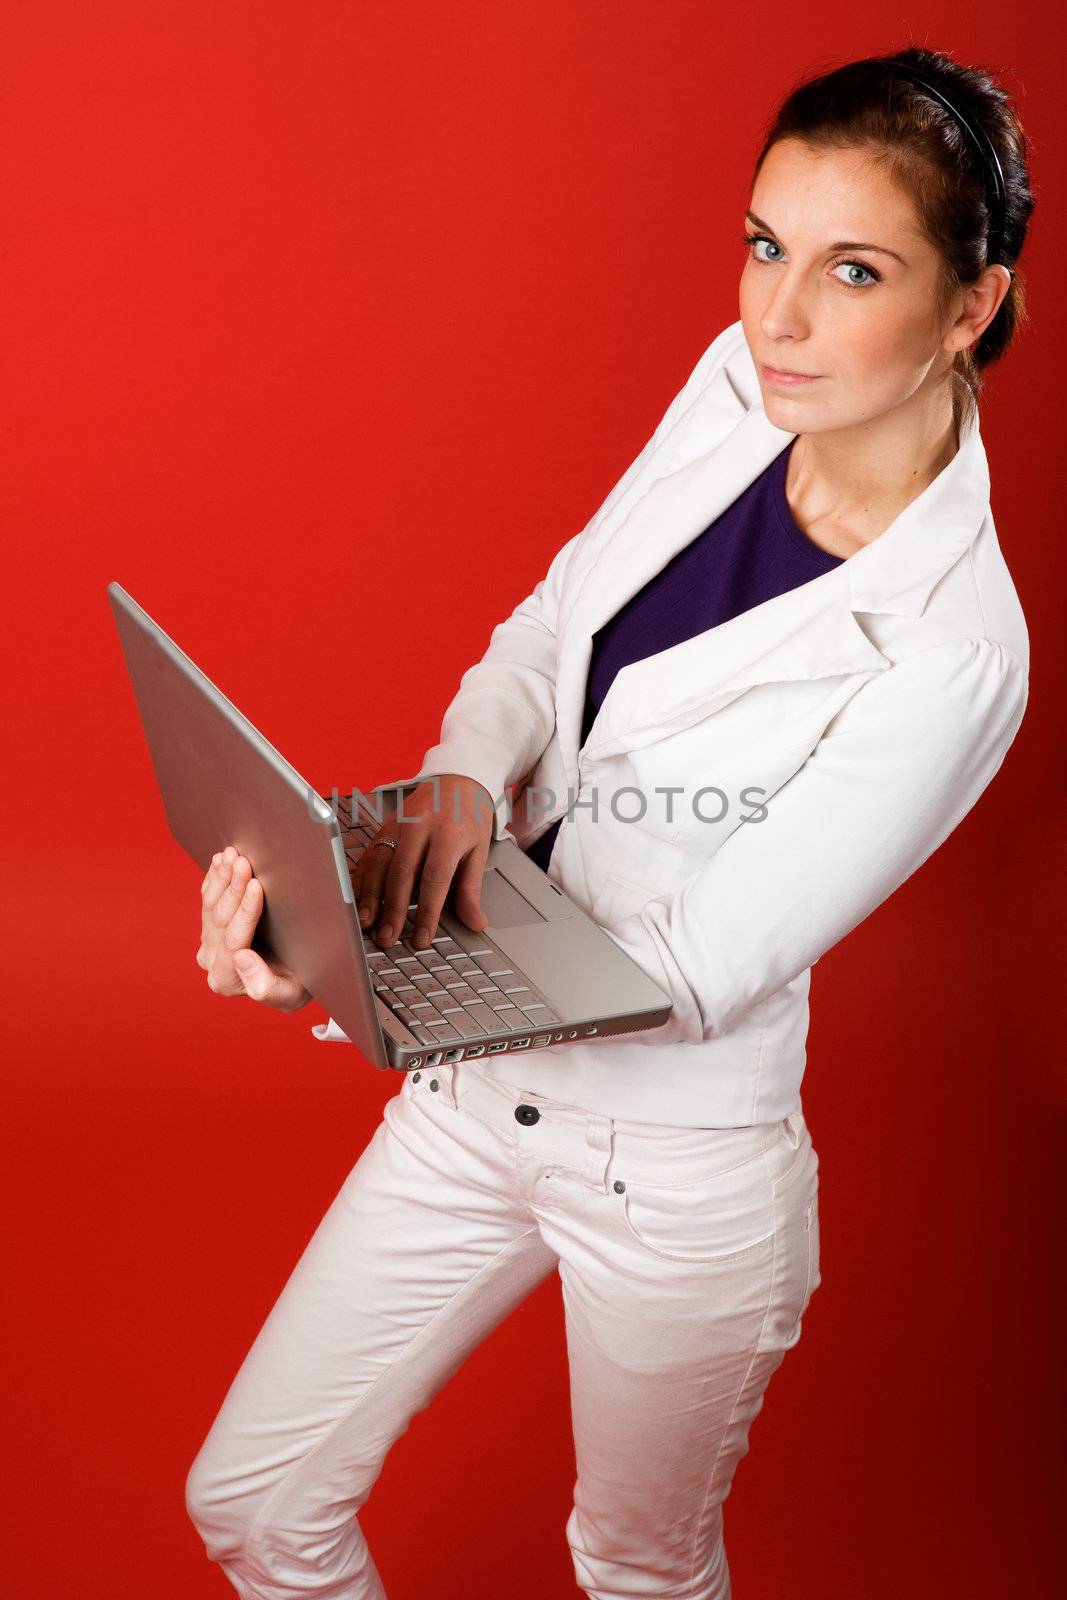 A young business woman or student using a laptop